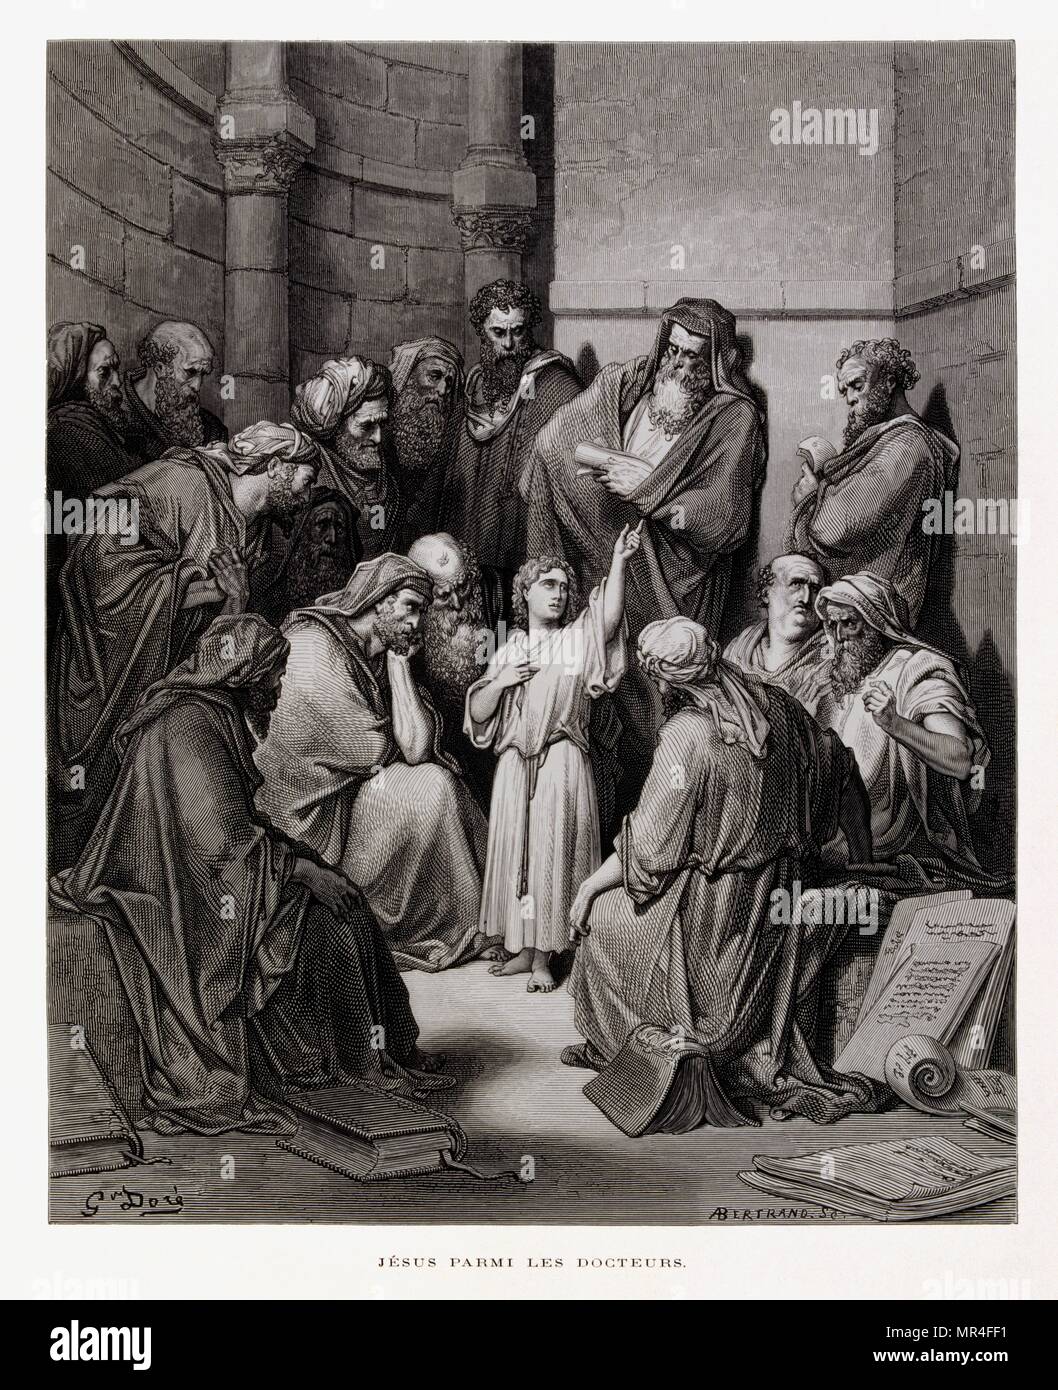 Jesus before the doctors, Illustration from the Dore Bible 1866. In 1866, the French artist and illustrator Gustave Dore (1832–1883), published a series of 241 wood engravings for a new deluxe edition of the 1843 French translation of the Vulgate Bible, popularly known as the Bible de Tours. This new edition was known as La Grande Bible de Tours and its illustrations were immensely successful. Stock Photo